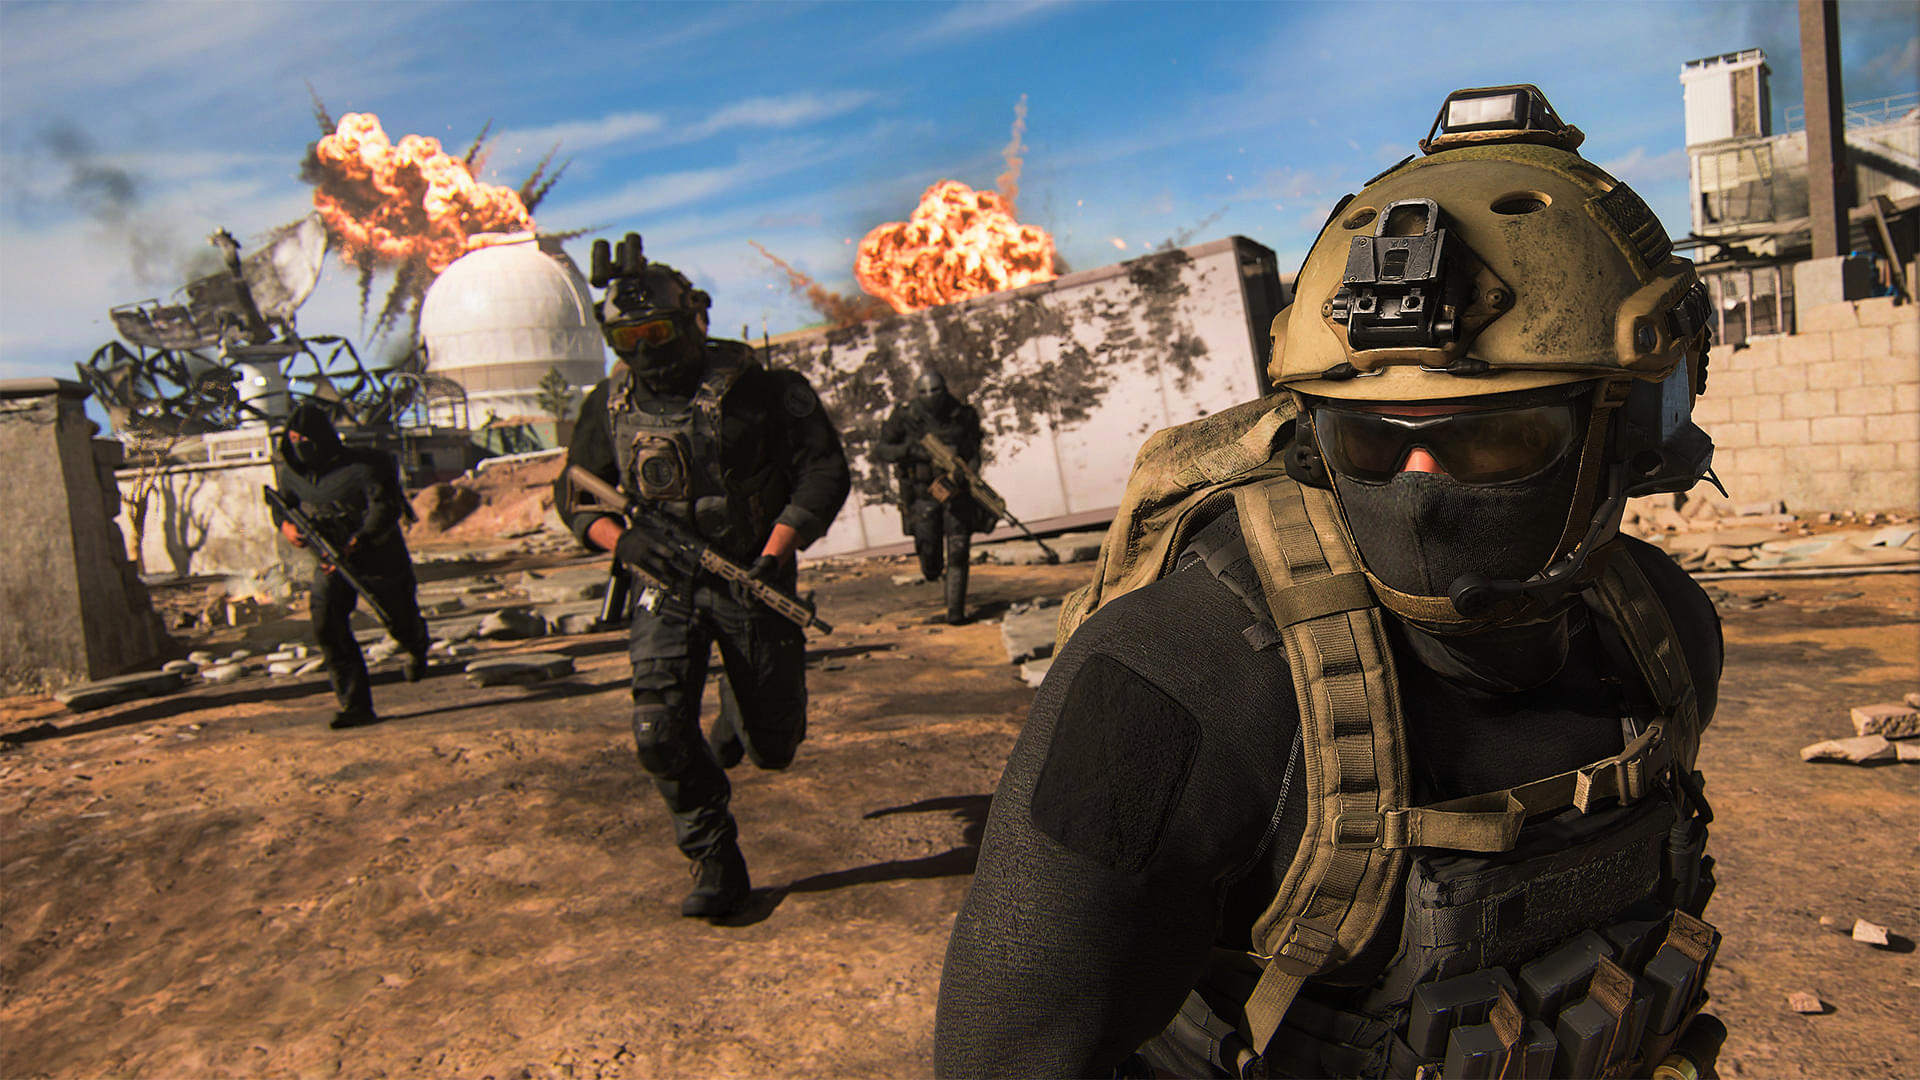 An Image of multiple soldiers running in Warzone 2